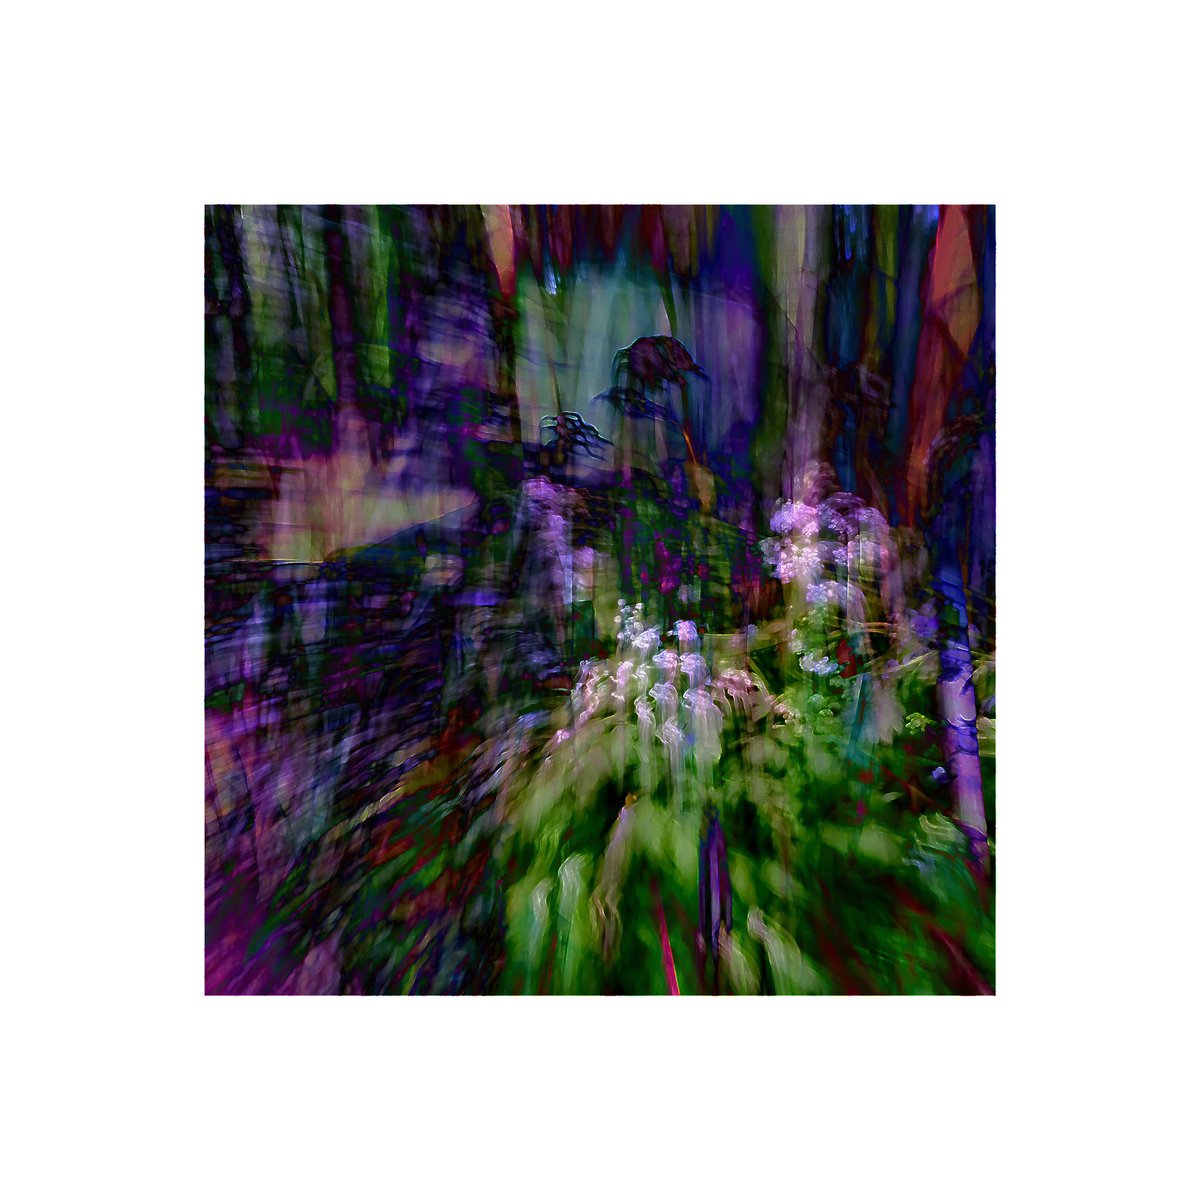 Day 154365 days of ICM photography 
#icmphotography #icm #intentionalcameramovement #abstractphotography #abstract #icmphoto #icmphotomag #impressionistphotography #bluronpurpose #camerapainting #365in2023